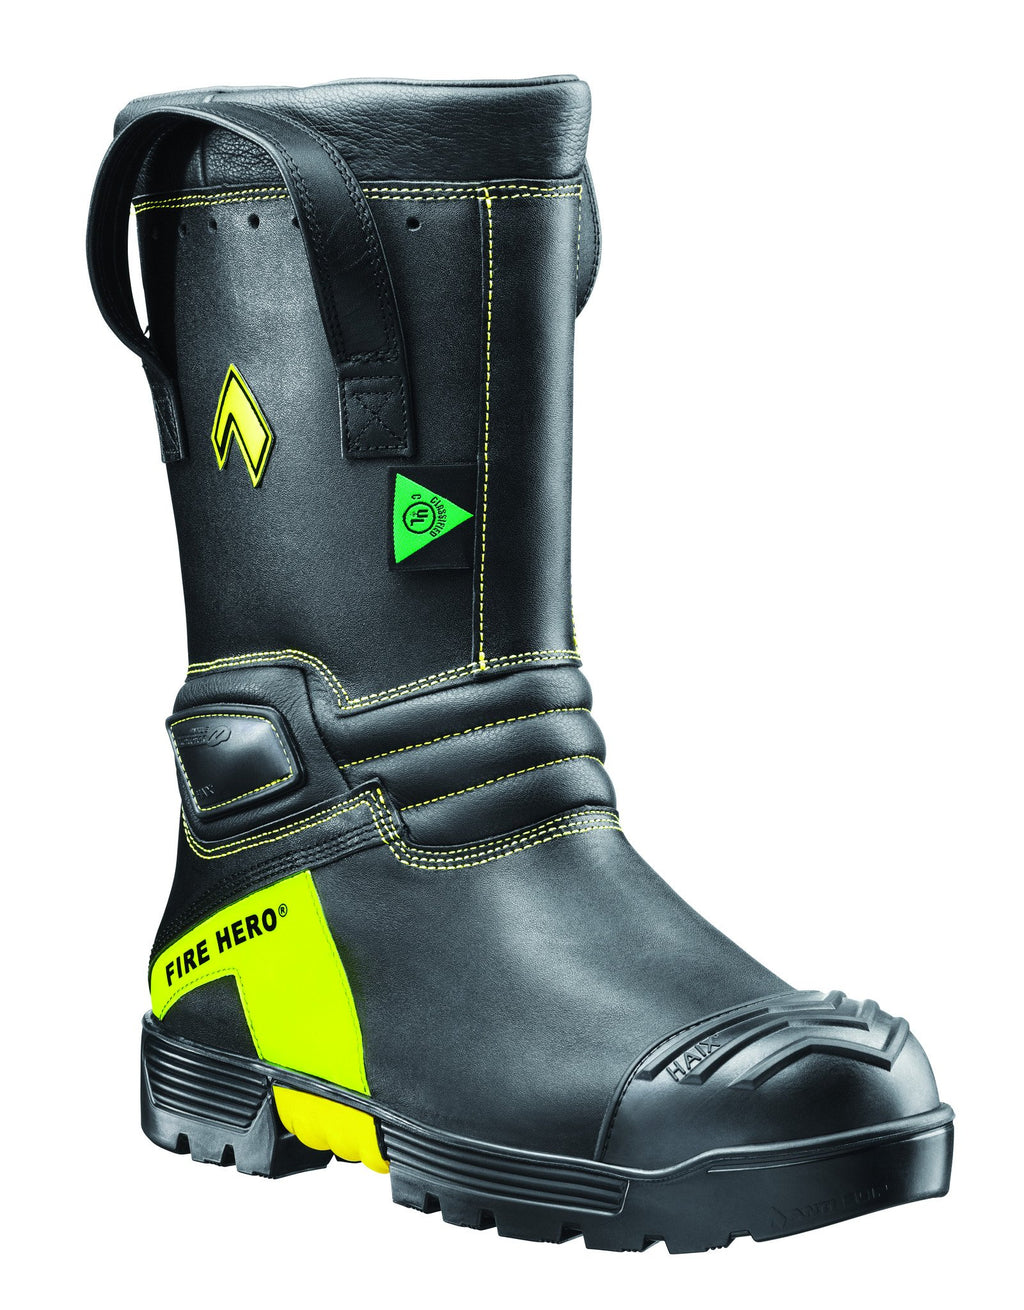 Haix Fire Hero Xtreme Boots - Ladies - mtrsuperstore